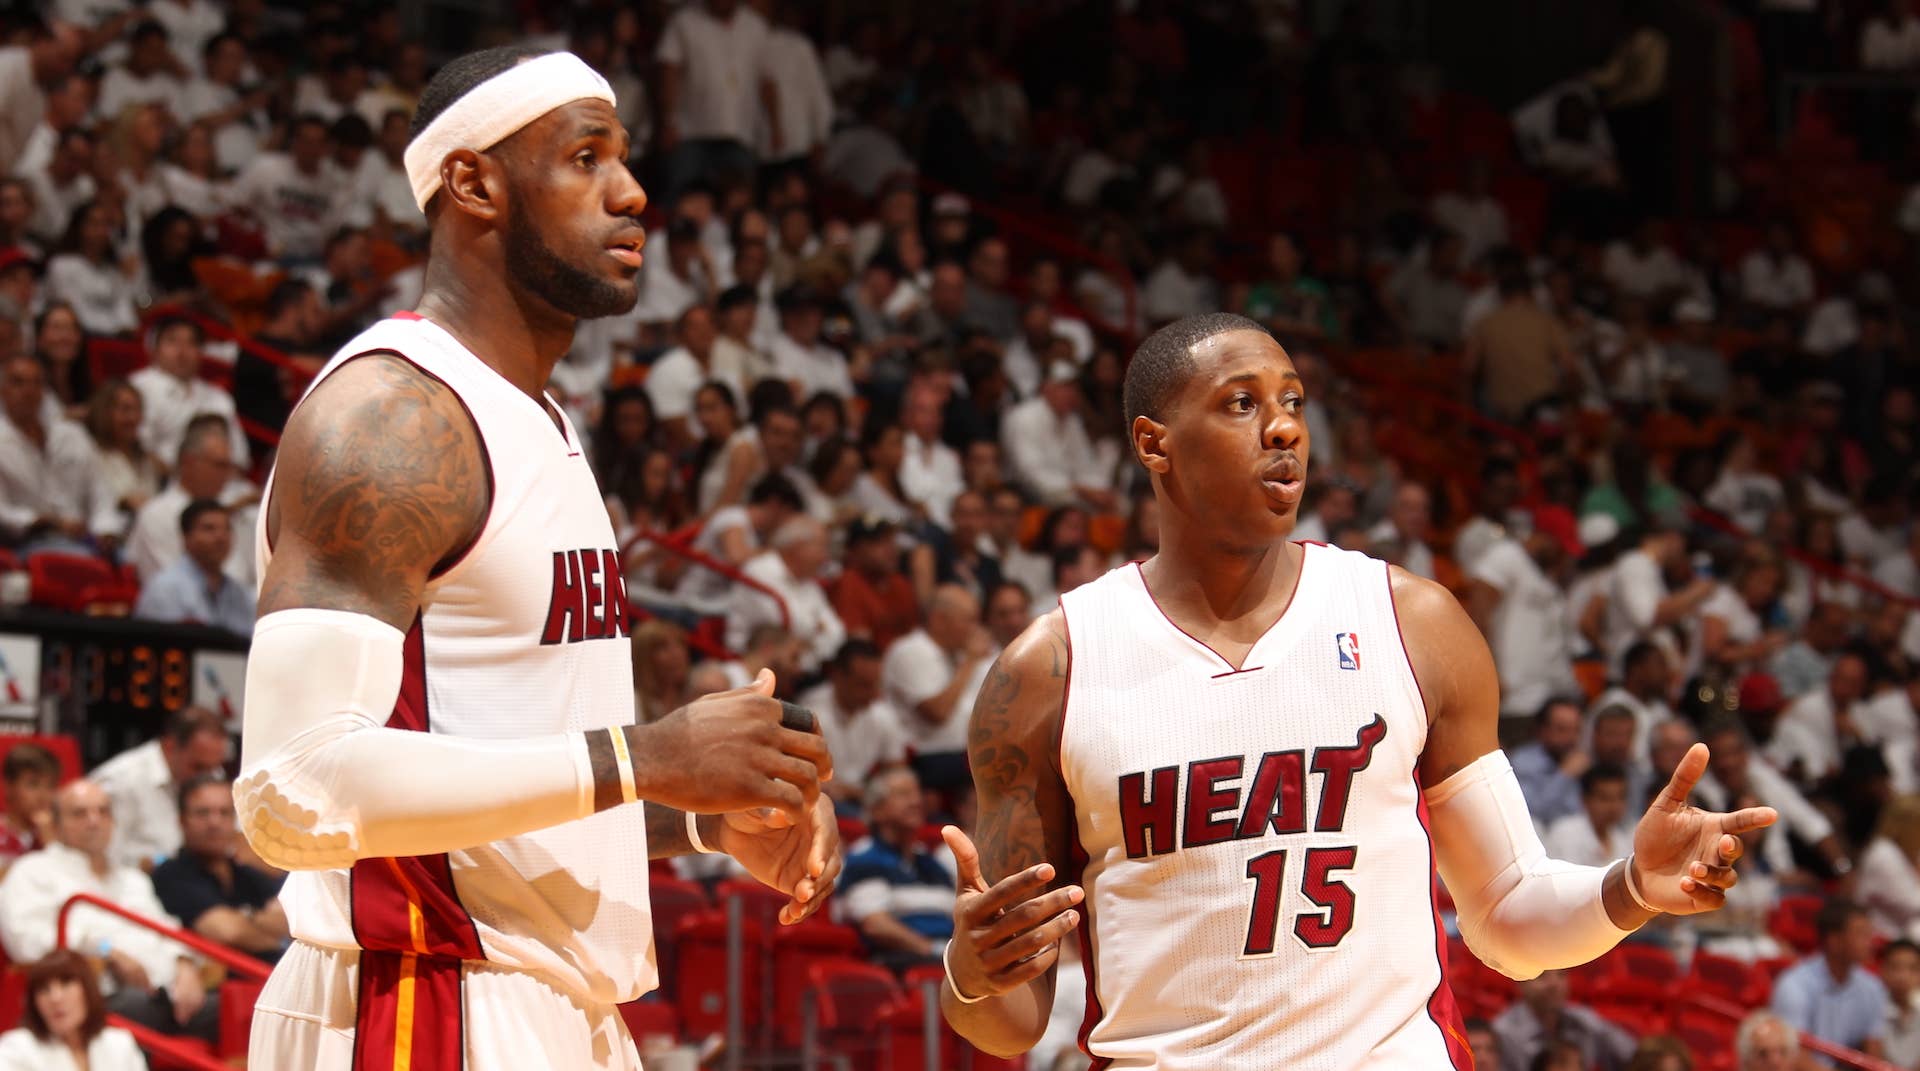 Miami Heat's LeBron James and Mario Chalmers in 2013